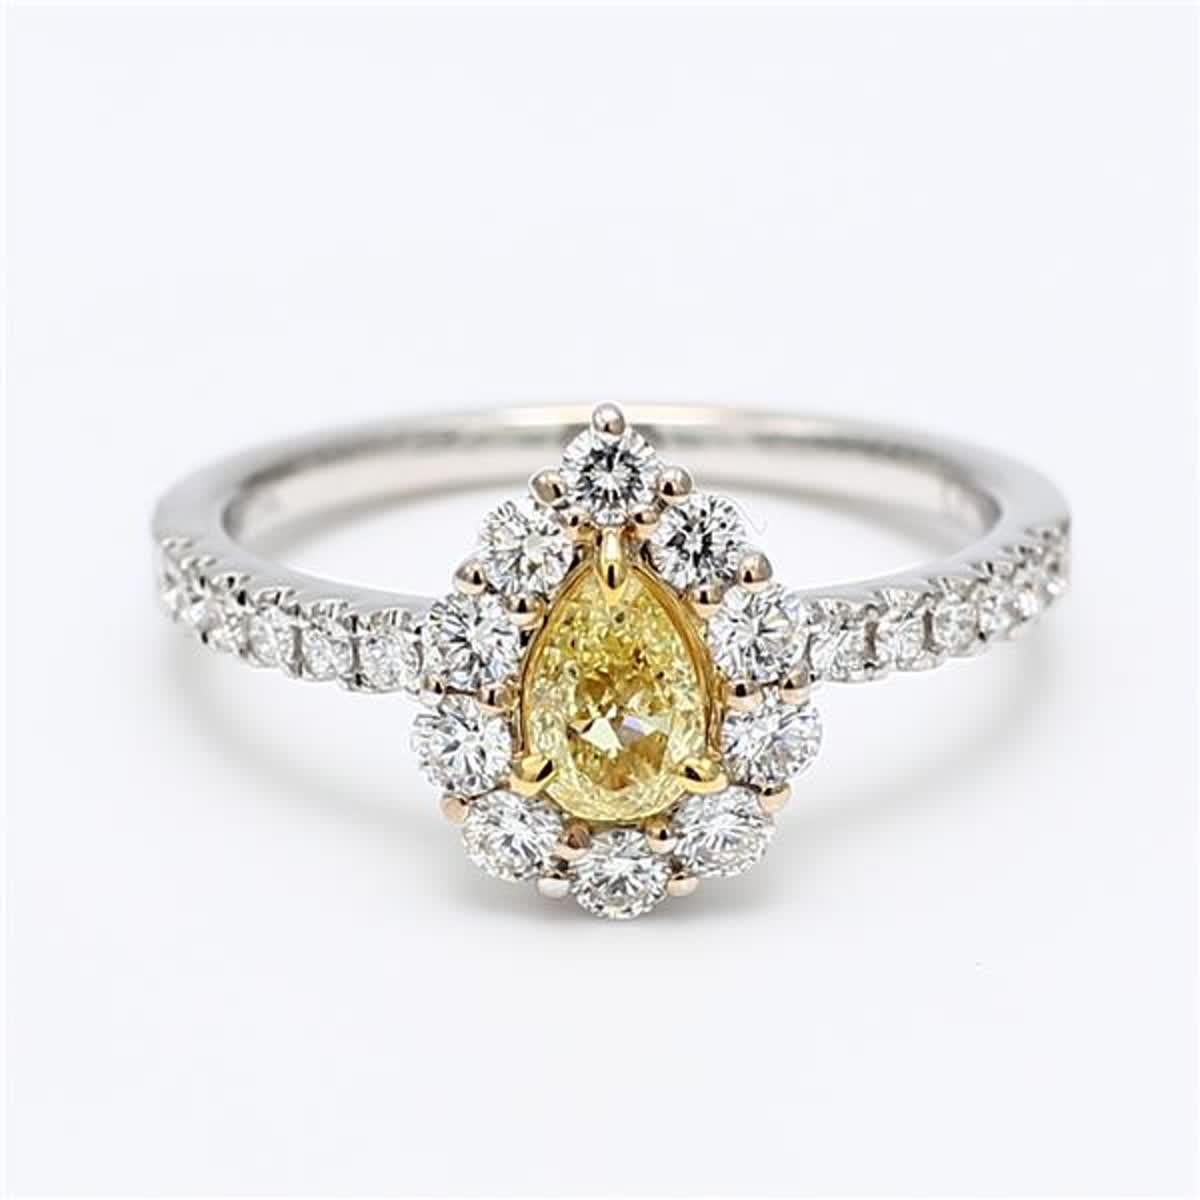 RareGemWorld's classic diamond ring. Mounted in a beautiful 18K Yellow and White Gold setting with a natural pear cut yellow diamond. The yellow diamond is surrounded by small round natural white diamond melee. This ring is guaranteed to impress and